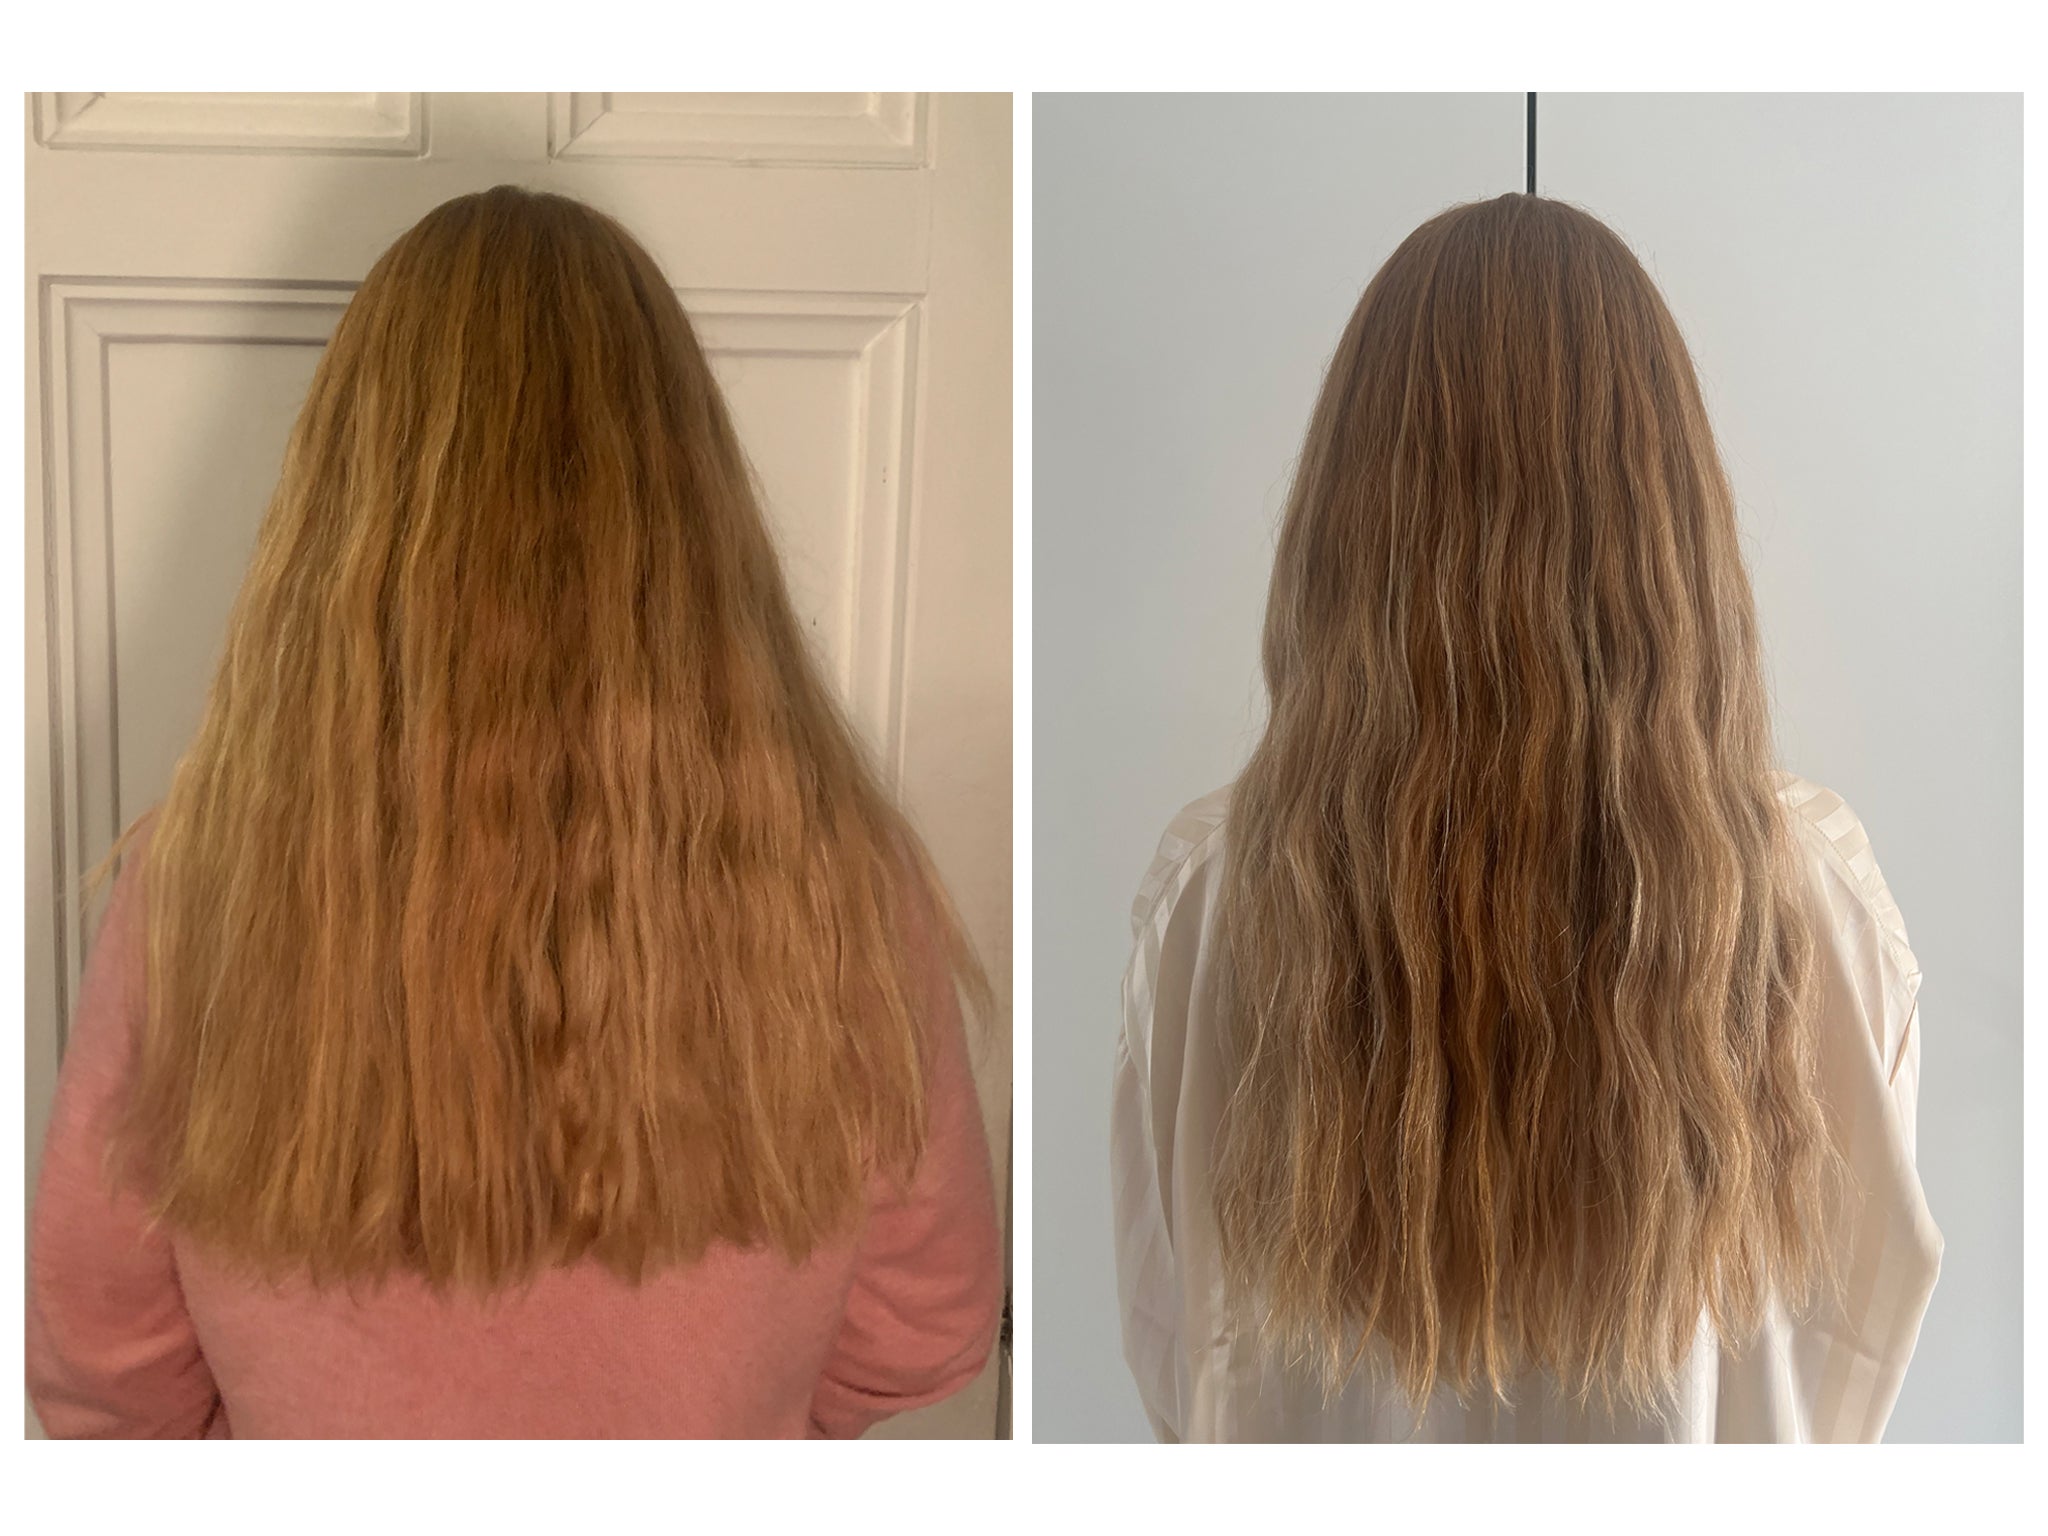 Olaplex review: The hair products repaired my damaged locks | The